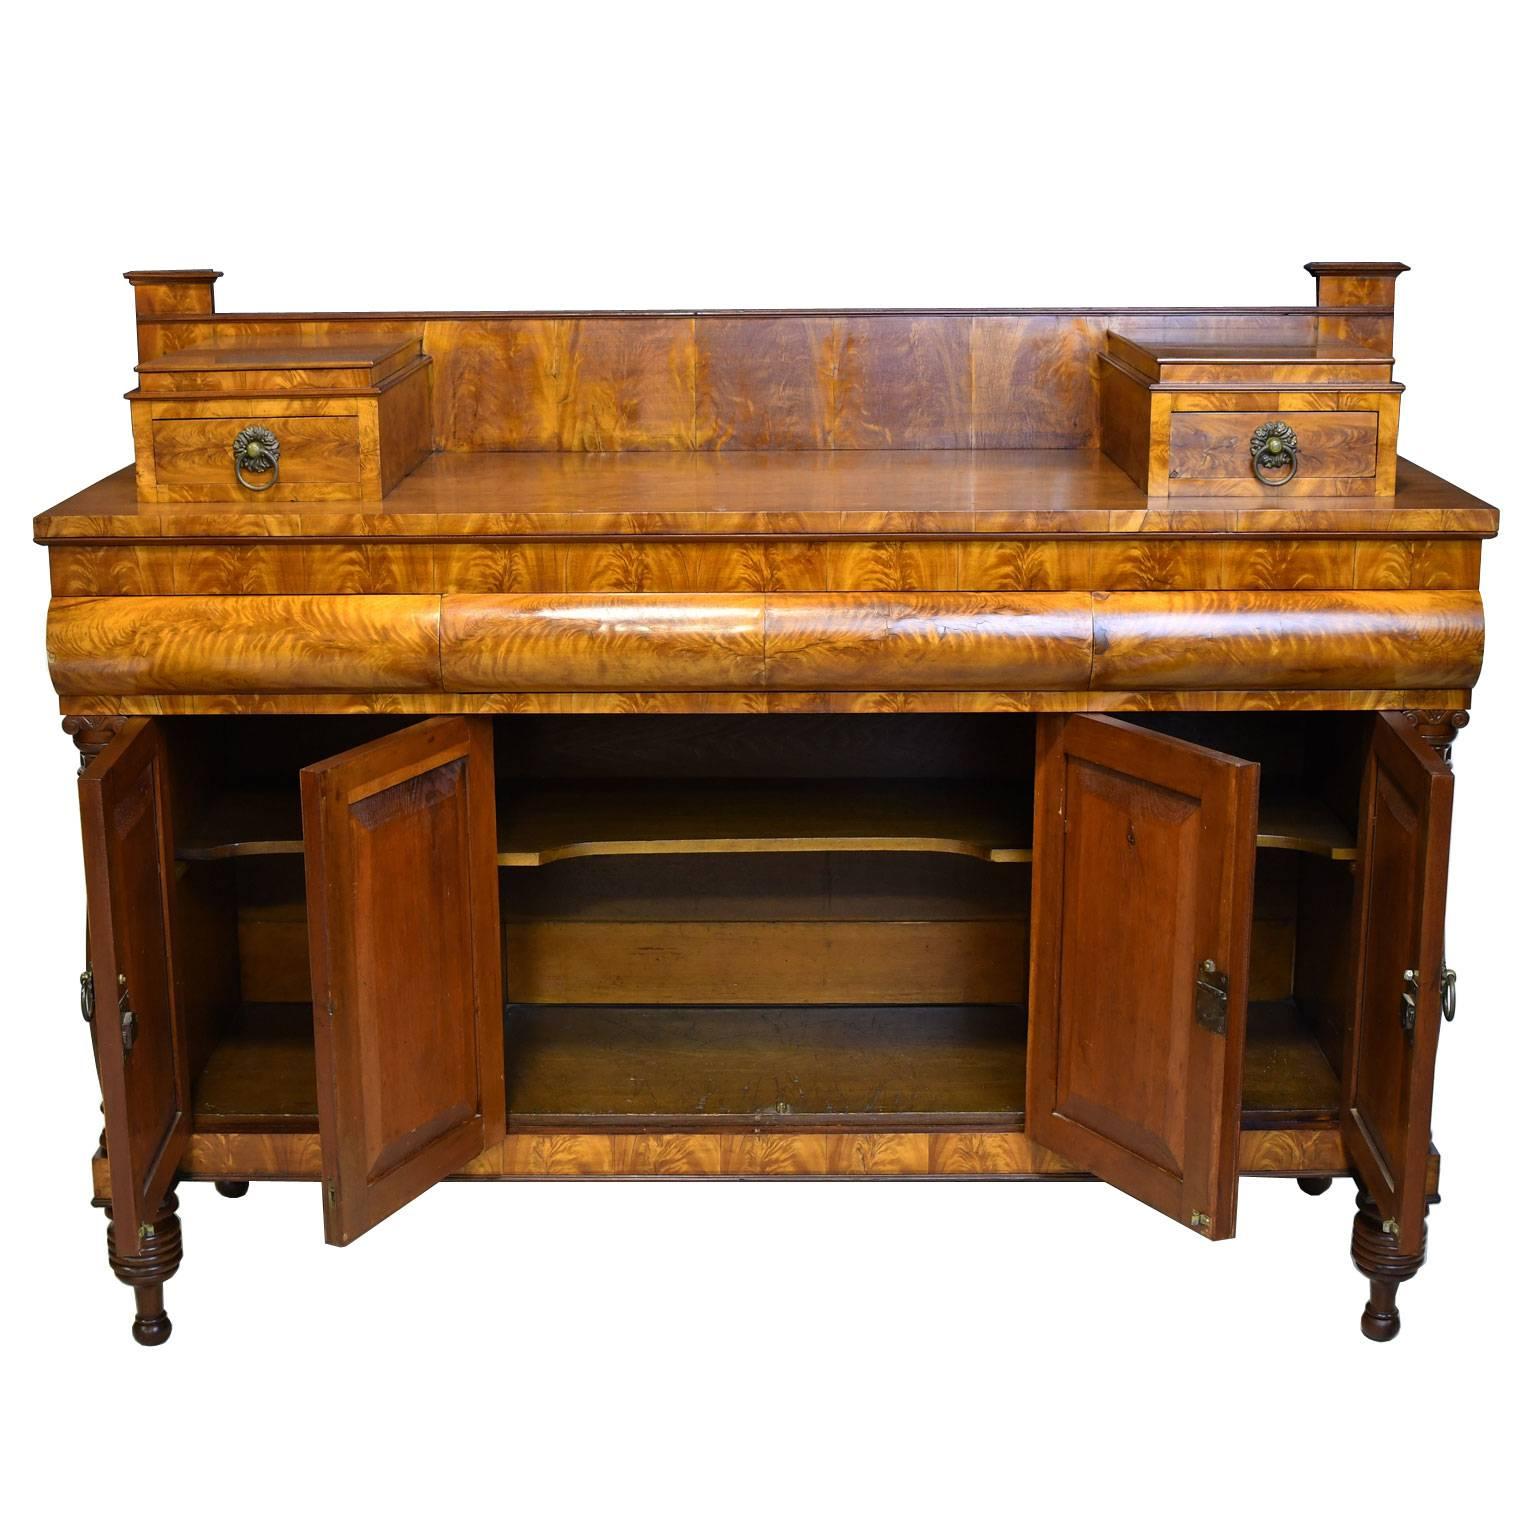 Cast American Empire Sideboard in Satinwood, Vermont, circa 1825 For Sale